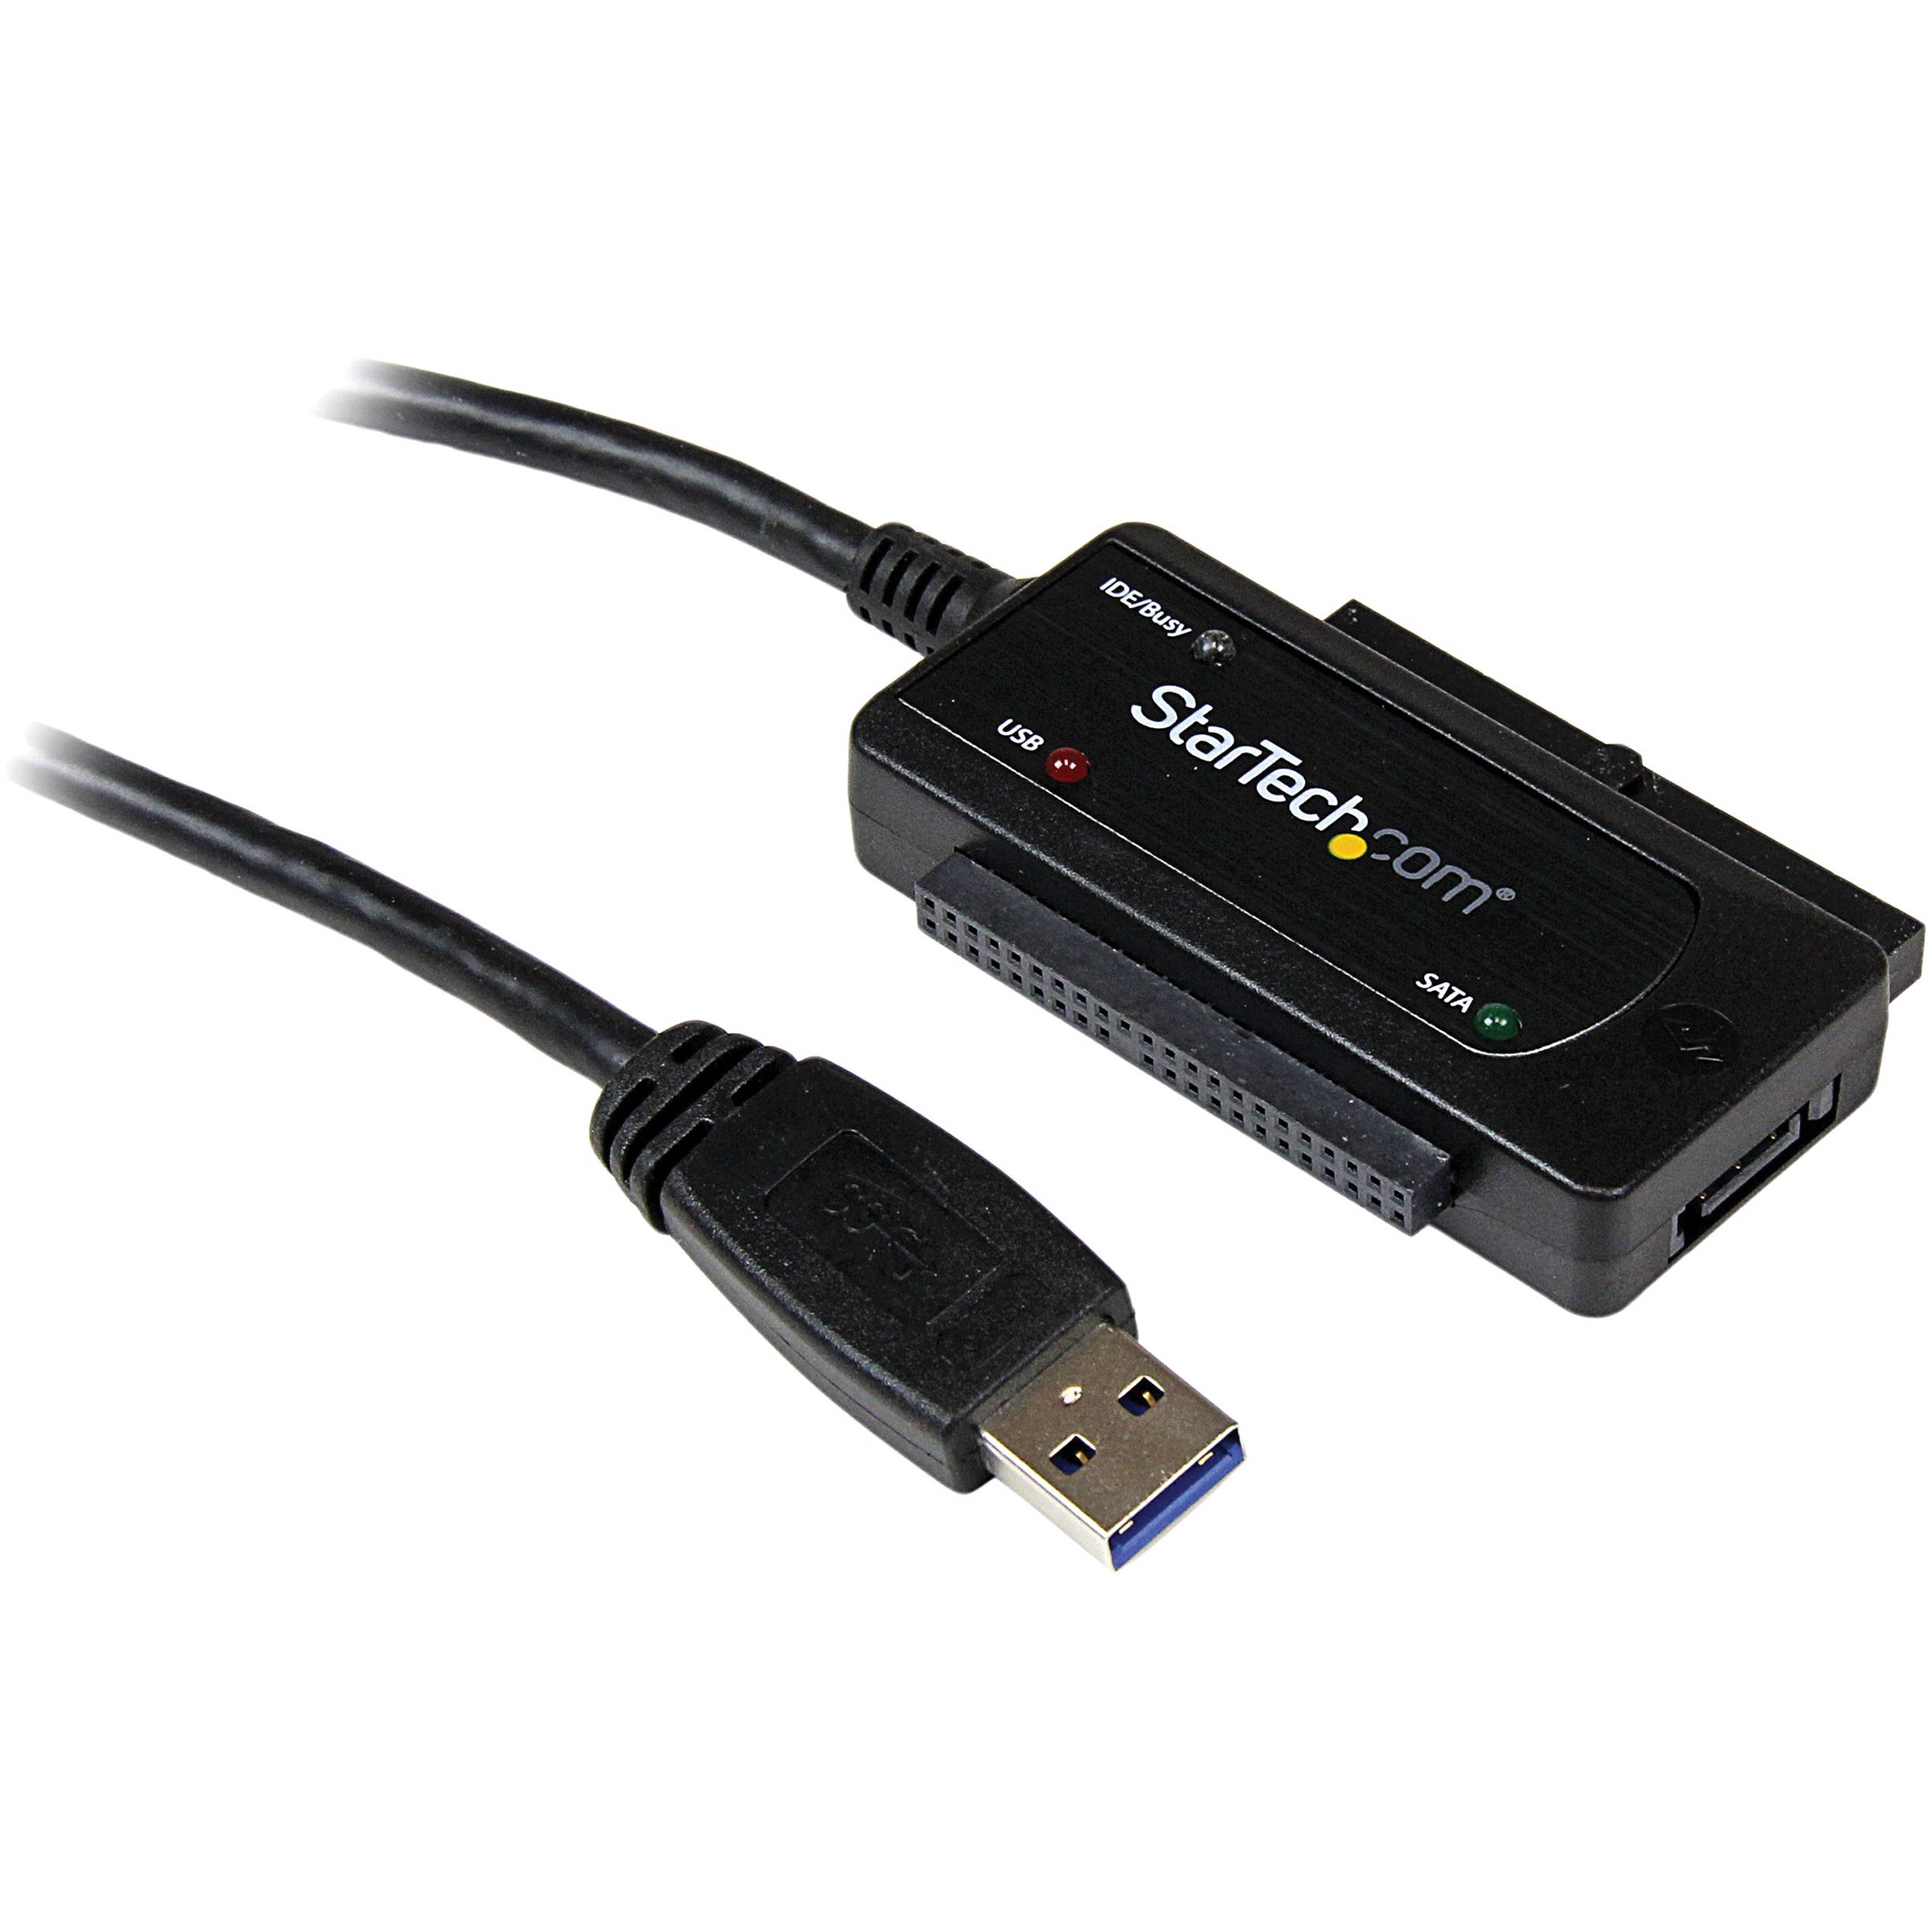 StarTech USB 3.0 to IDE/SATA Adapter Cable (Black)